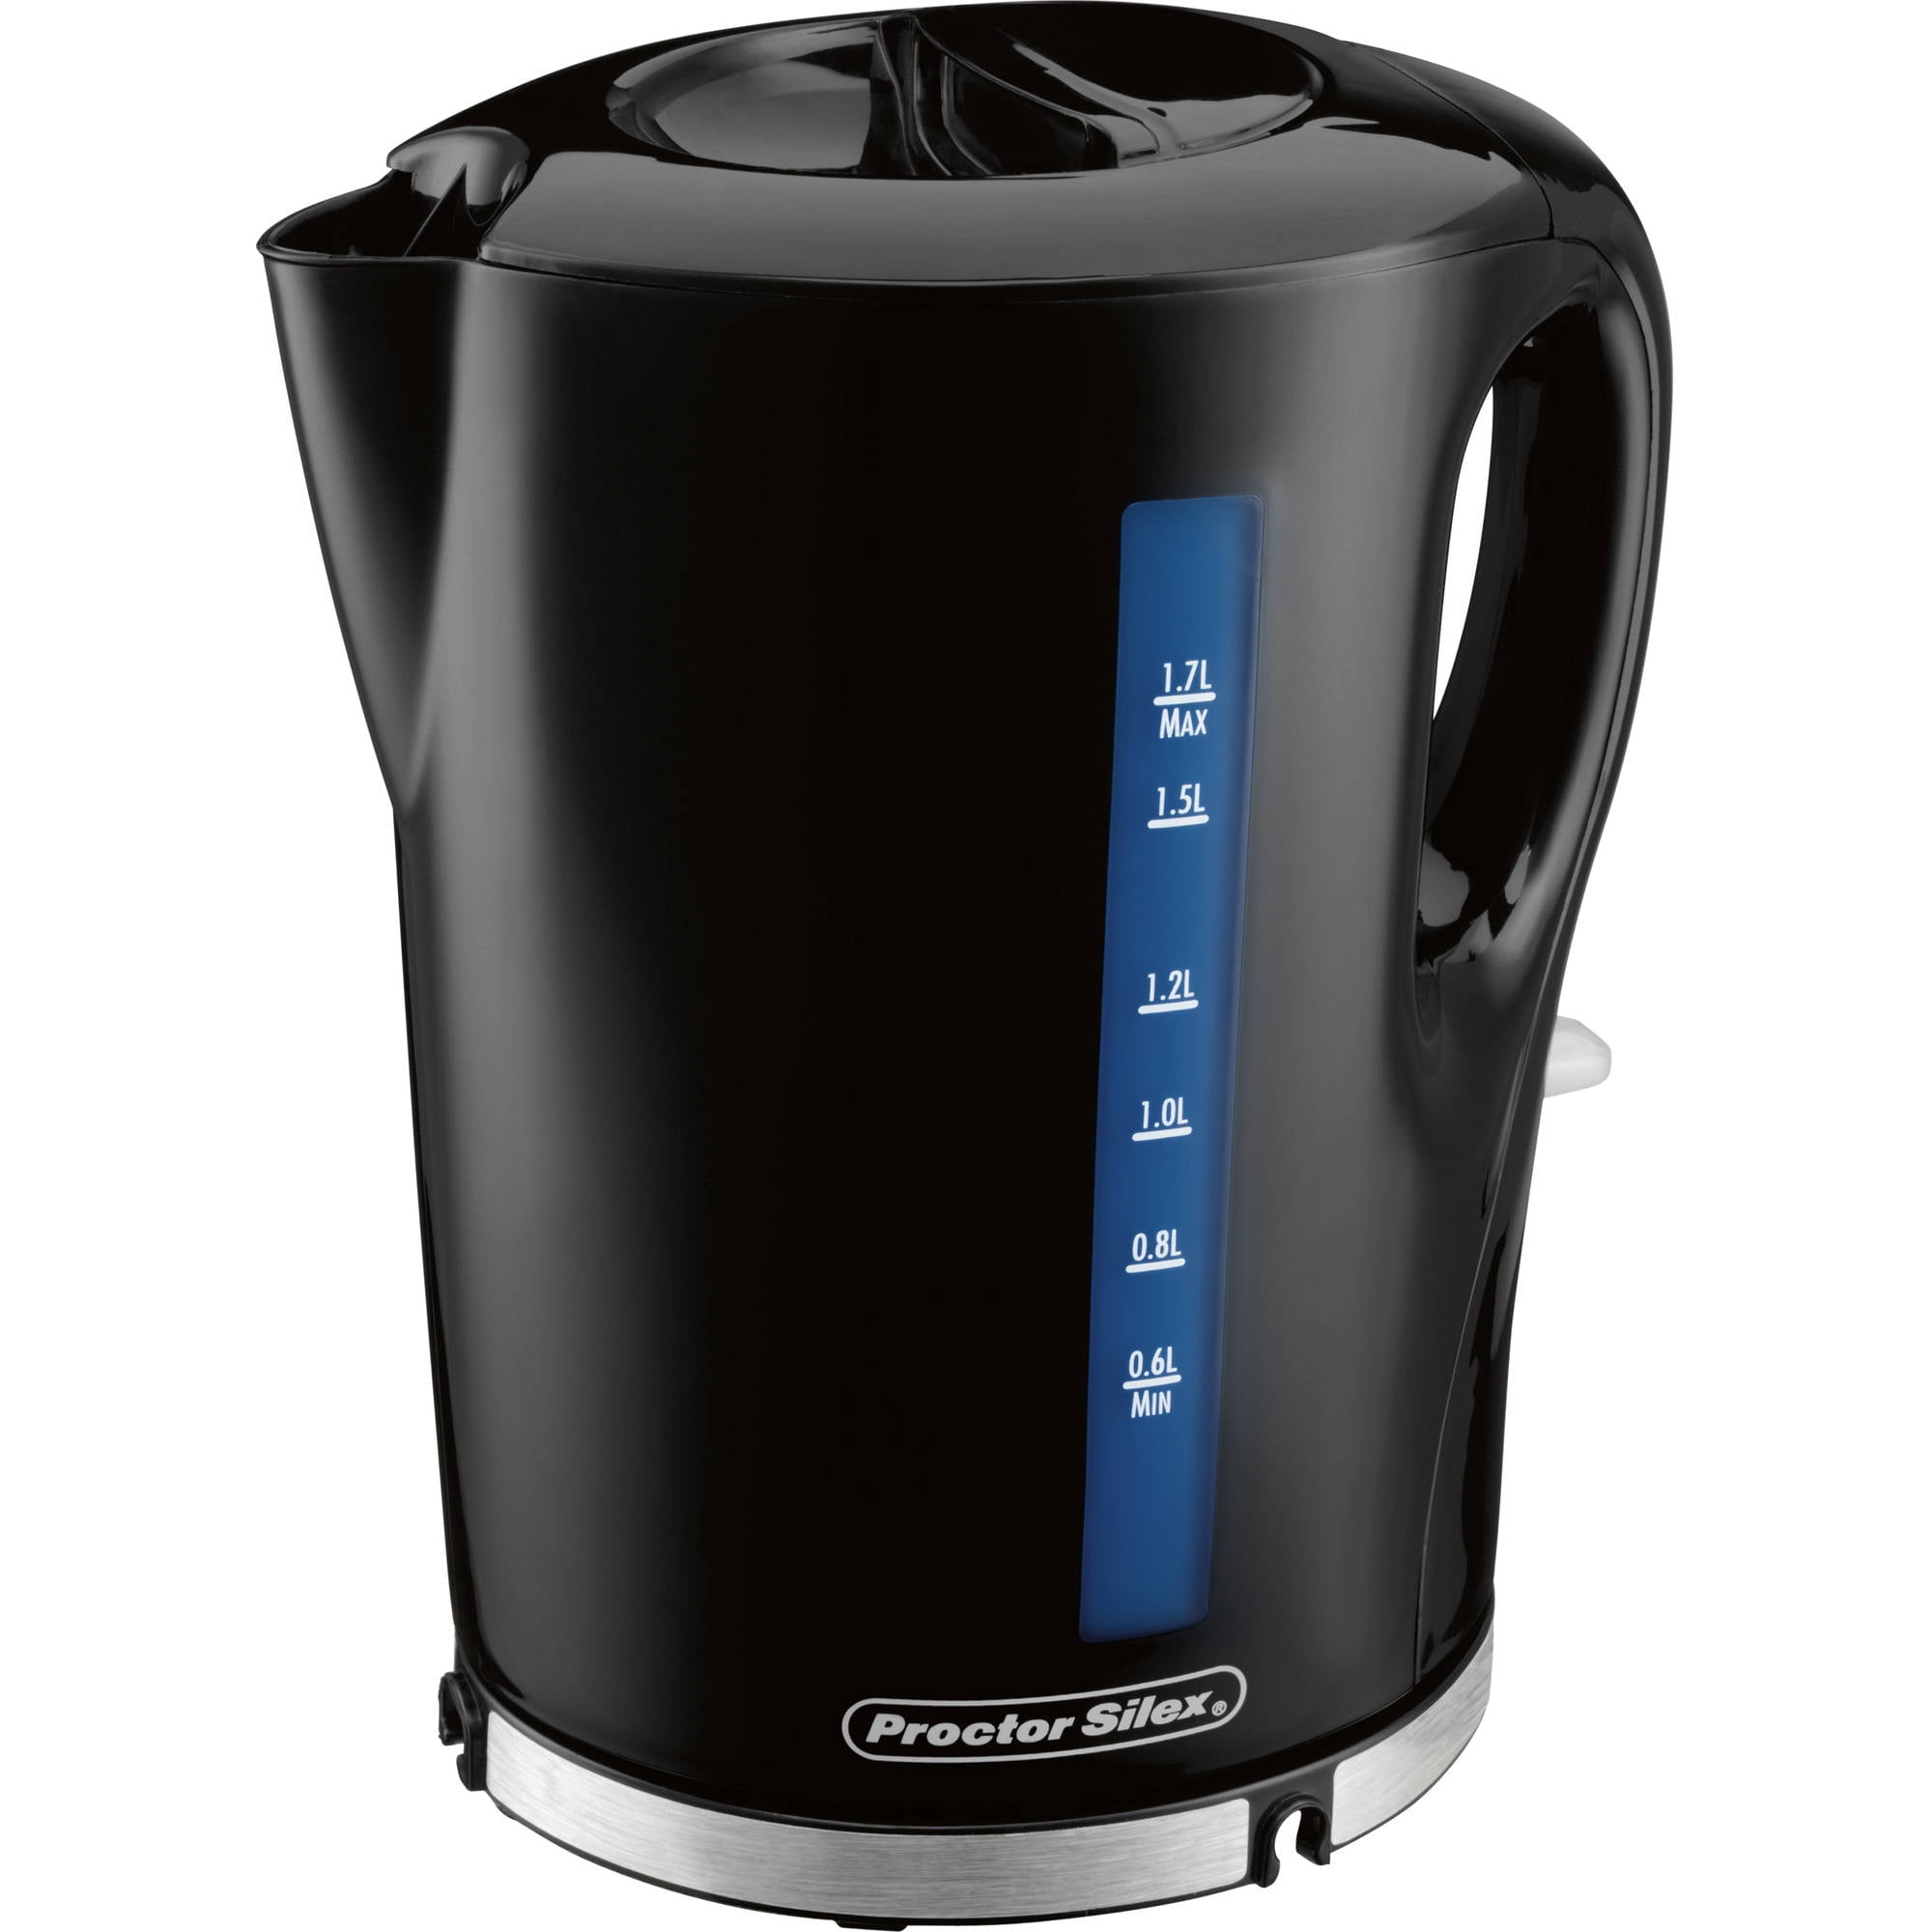 Elite by Maxi-Matic Cordless Electric Kettle - Silver/Black, 1.7 L - Ralphs